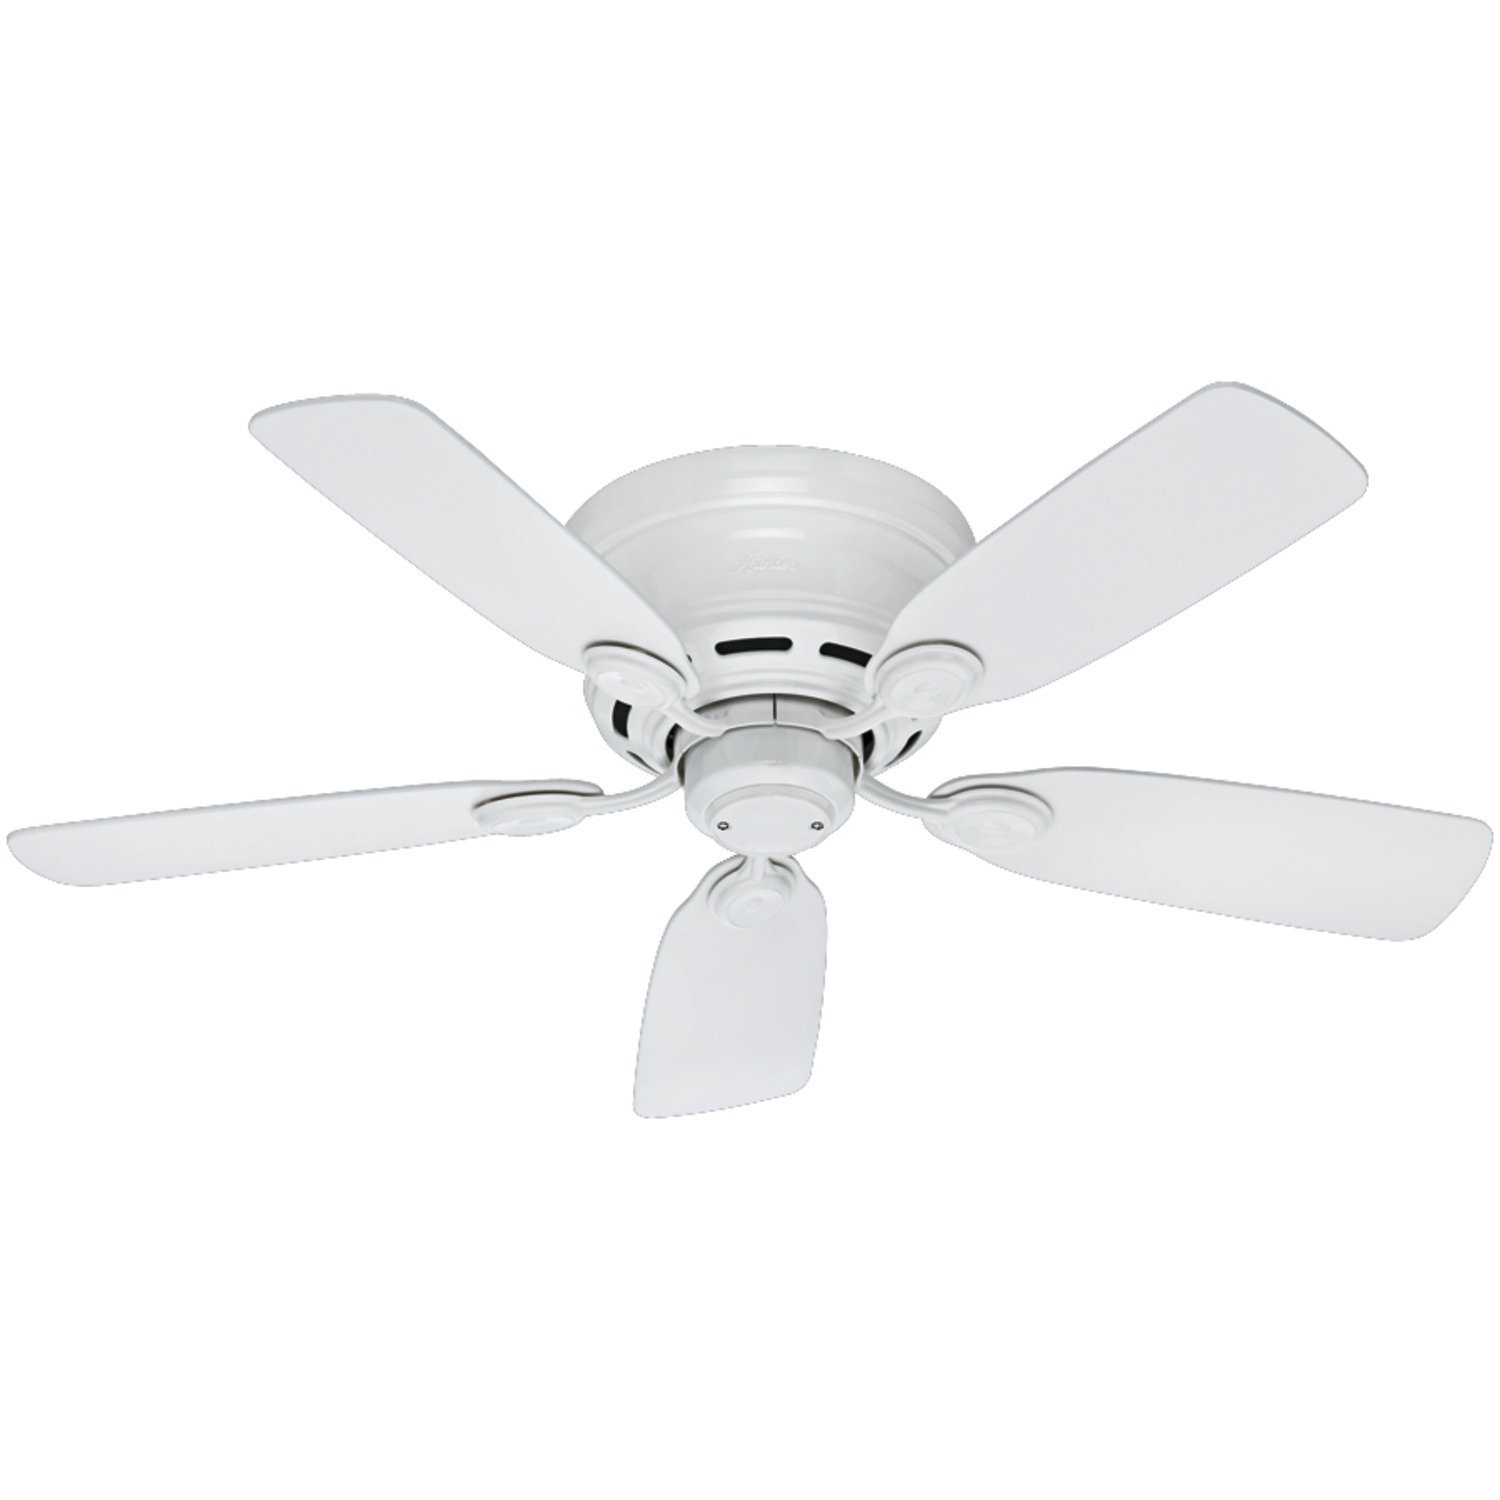 Small white ceiling fans convey solace and satisfaction to ...